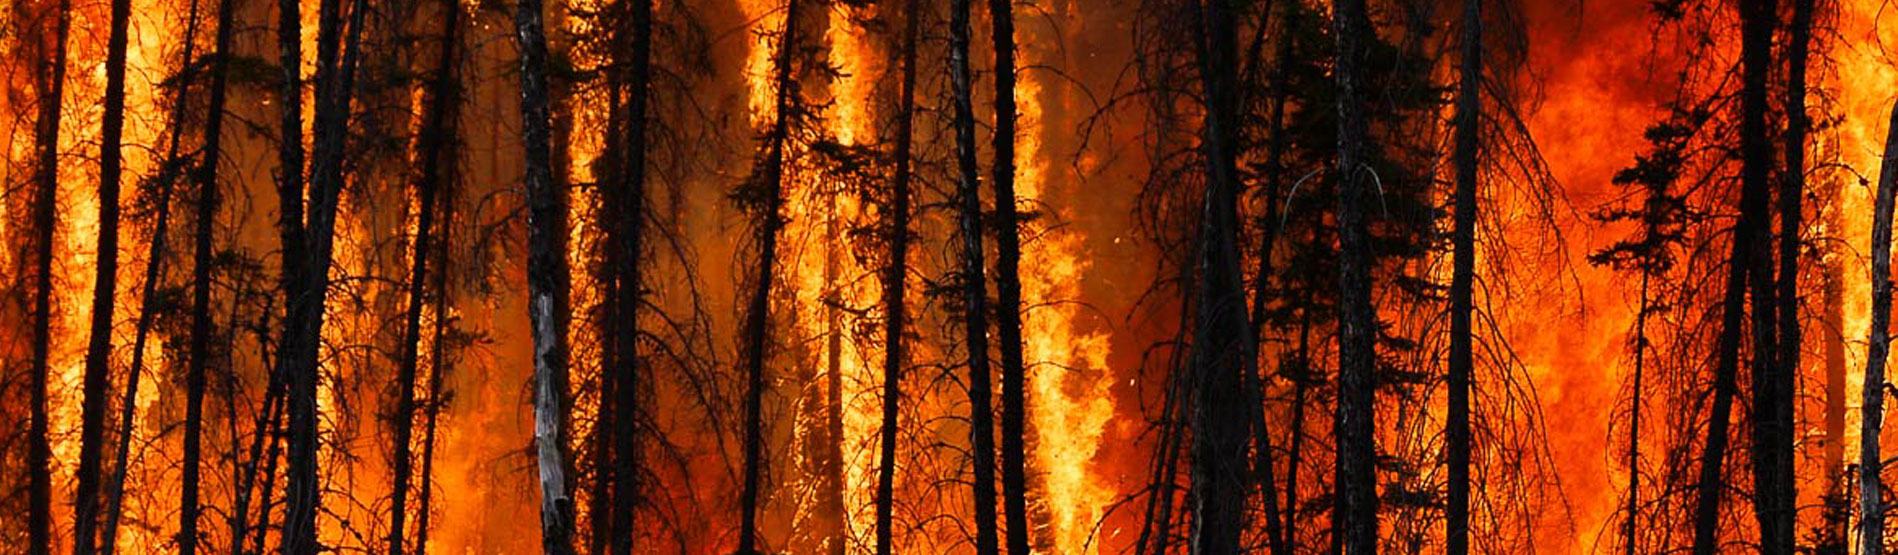 Mitigating the impact of wildfires on water resources